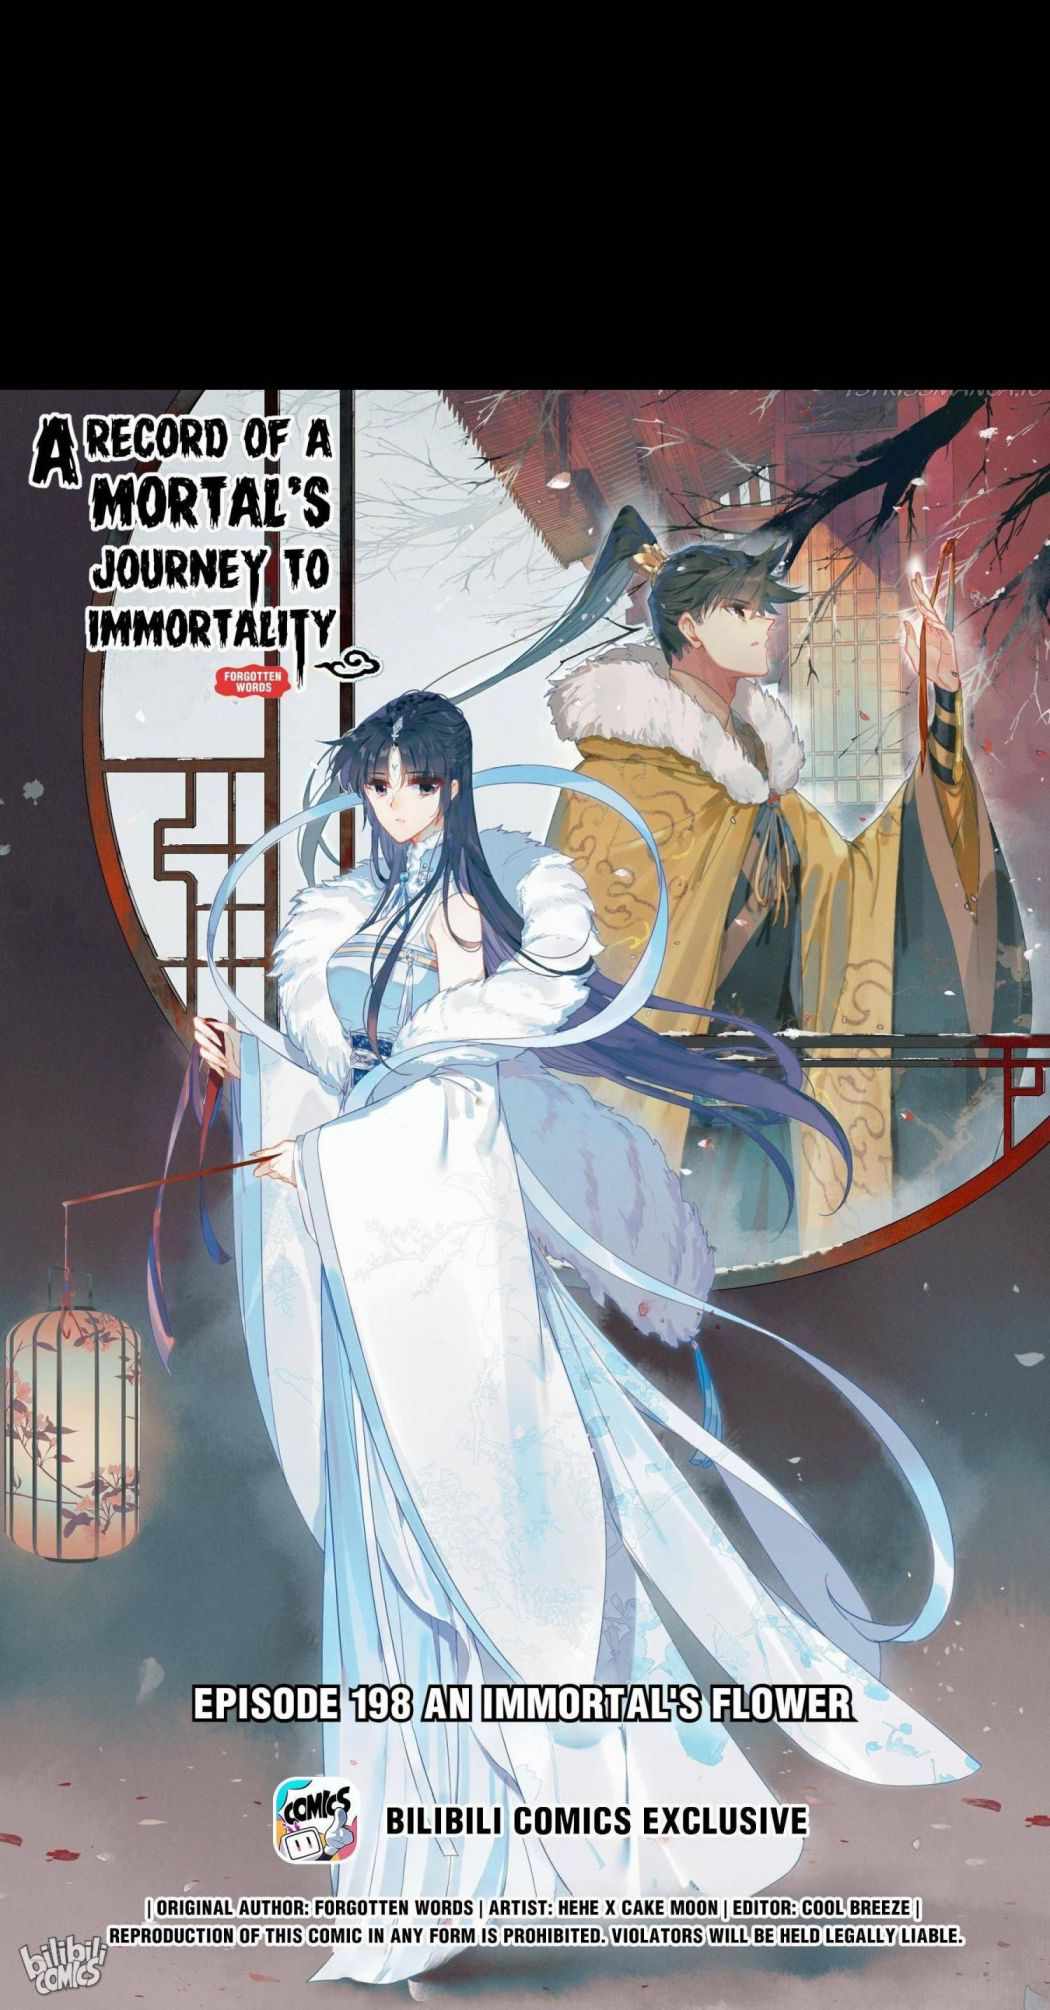 Mortal's Cultivation: journey to immortality Chapter 198